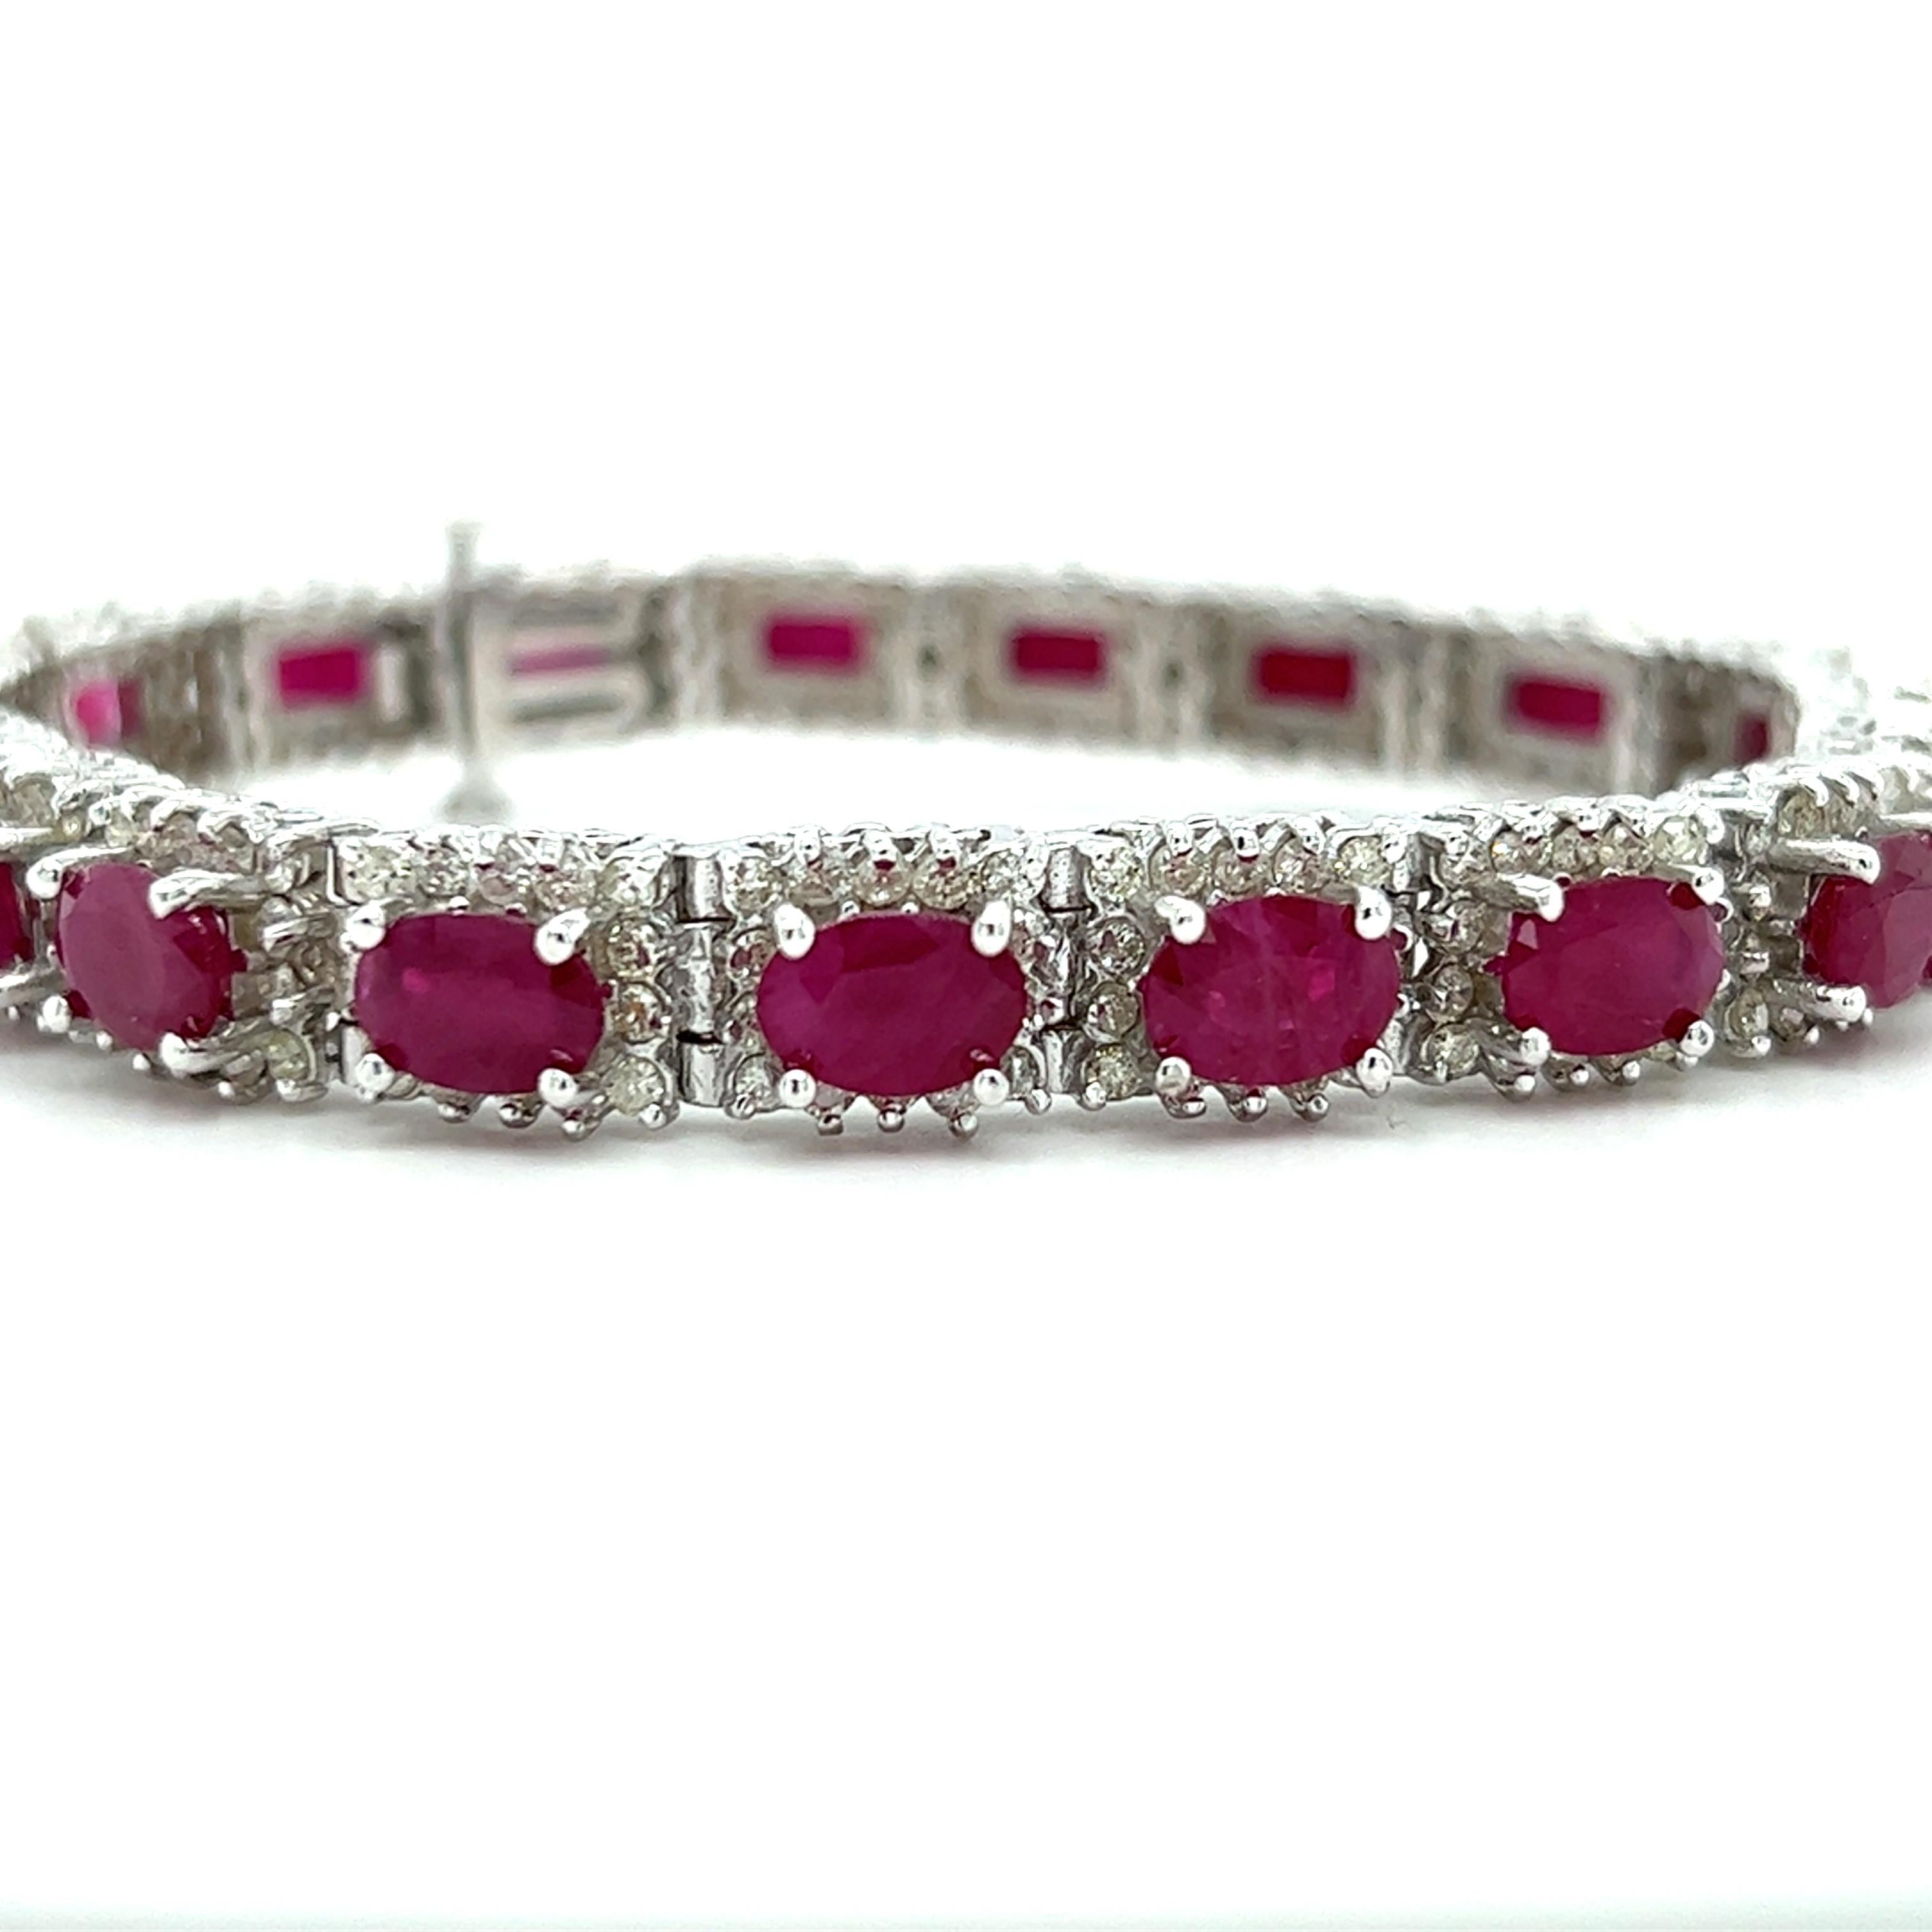 One 14 karat white gold line bracelet set with nineteen (19) 7x5mm oval pink rubies, approximately 12.00 carats total weight and two hundred sixty-five round brilliant cut diamonds, approximately 2.25 carats total weight with matching H/I color and